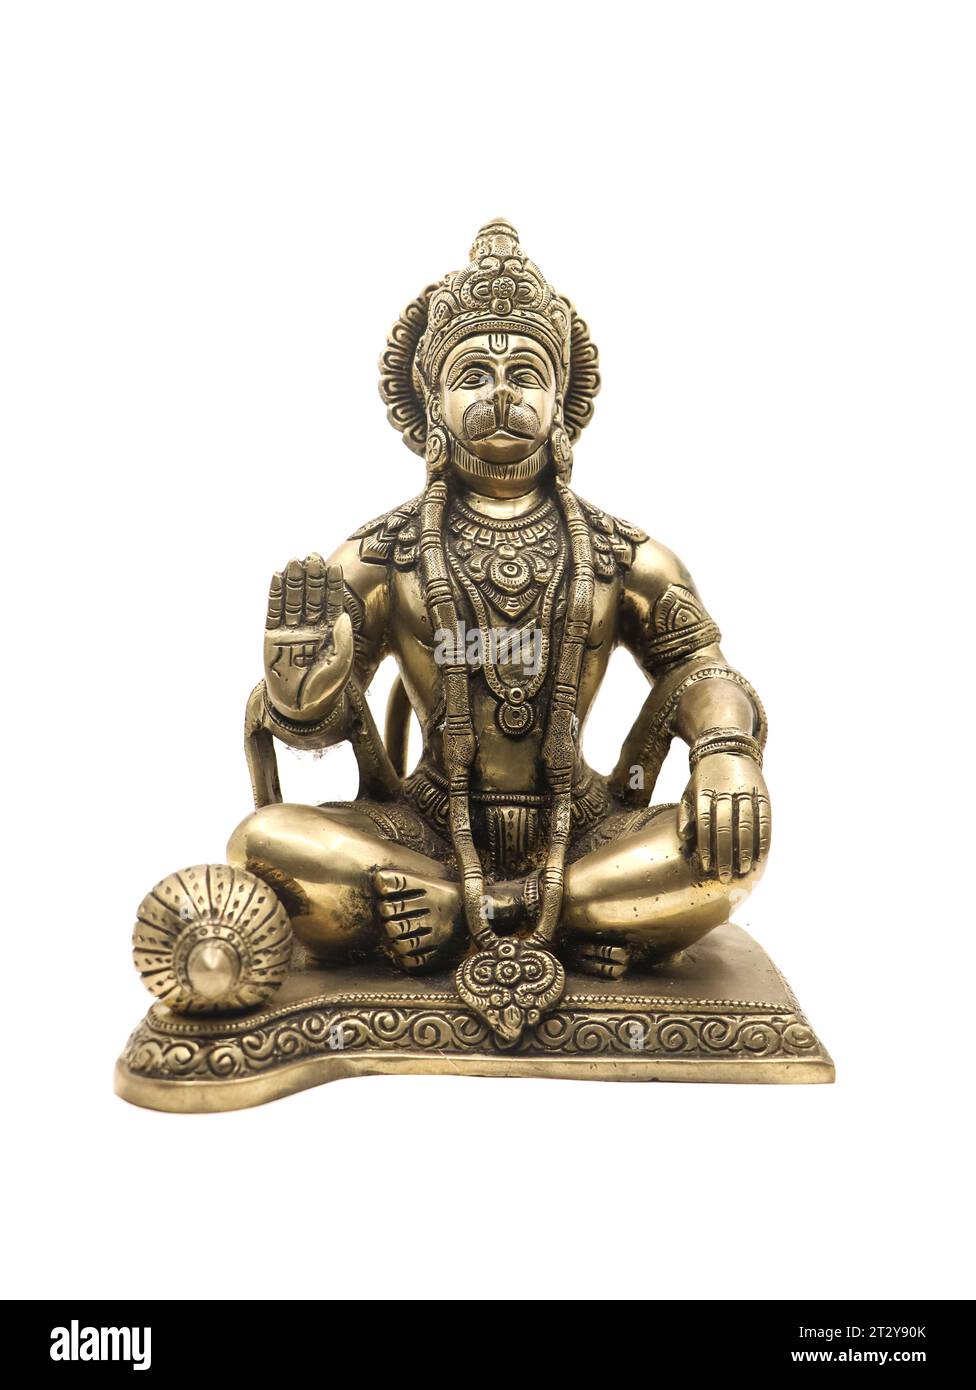 golden brass lord hanuman statue, a monkey god from ramayana of hindu mythology sitting and blessing made of isolated Stock Photo